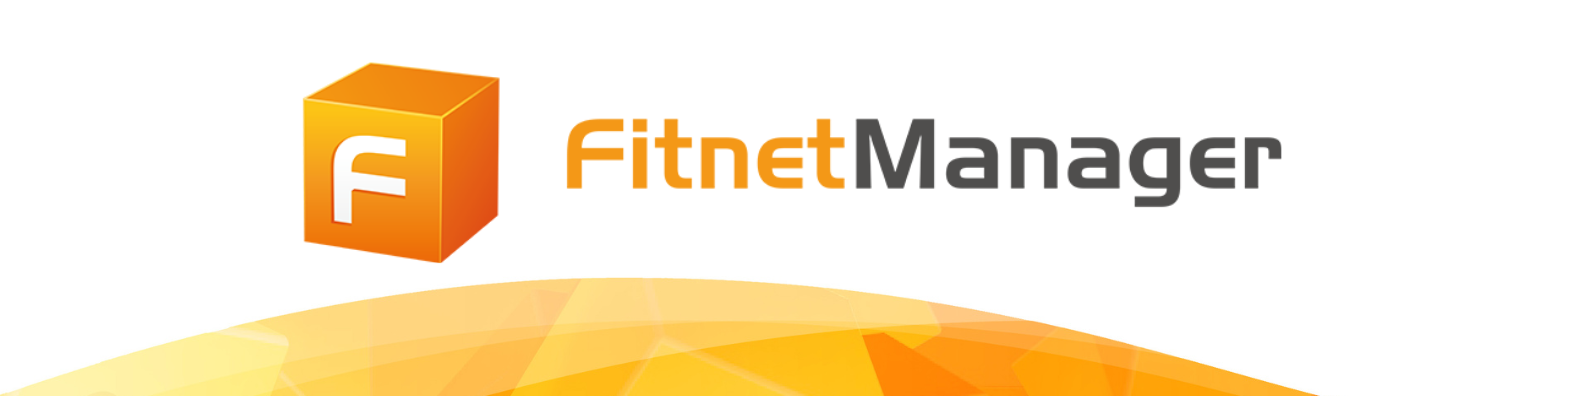 Review Fitnet Manager: The ERP Designed for Consulting and Services Companies - Appvizer